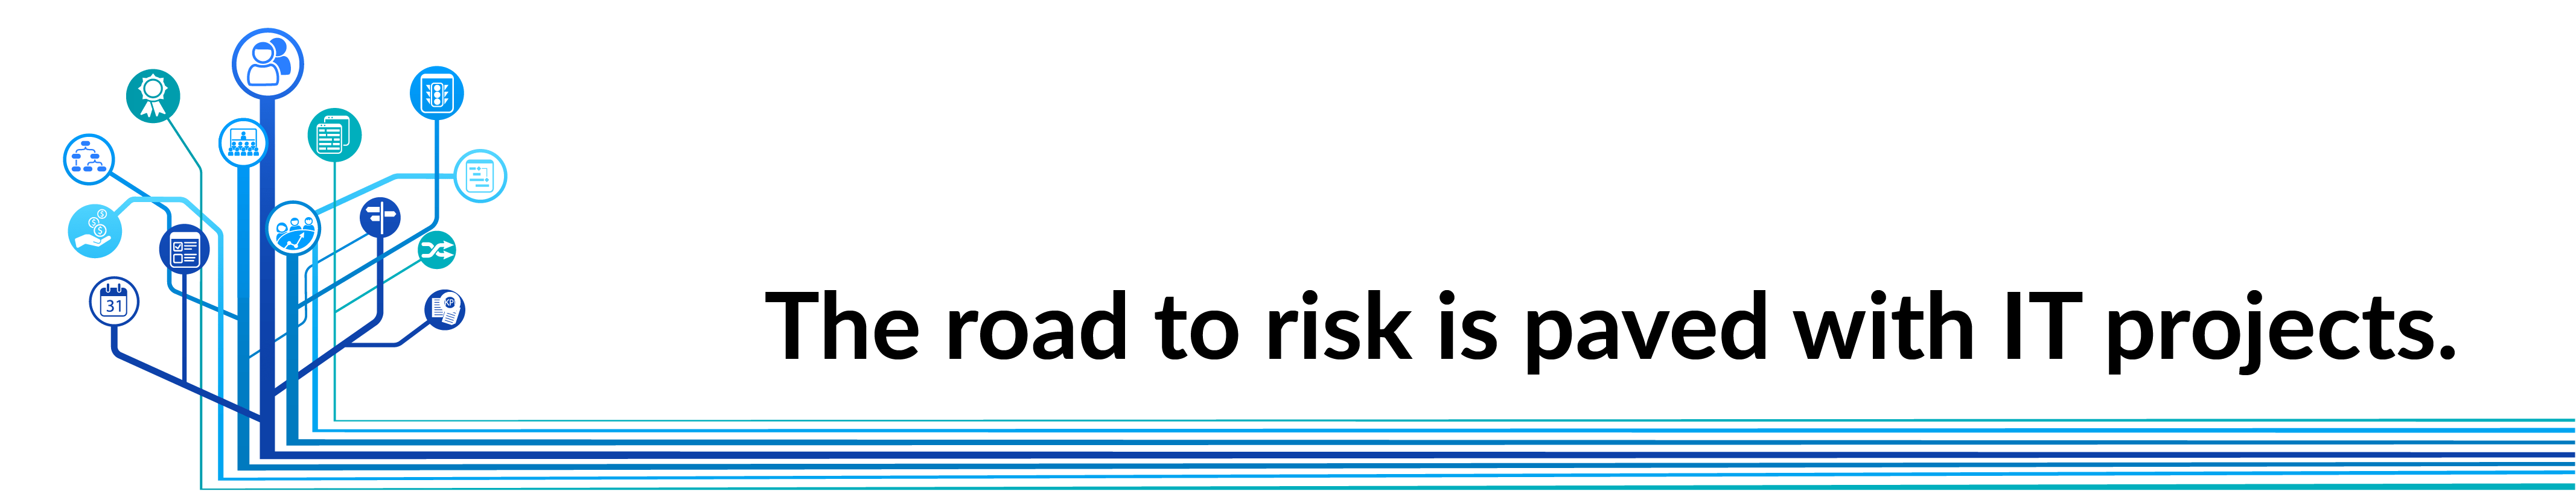 The road to risk is paved with IT projects